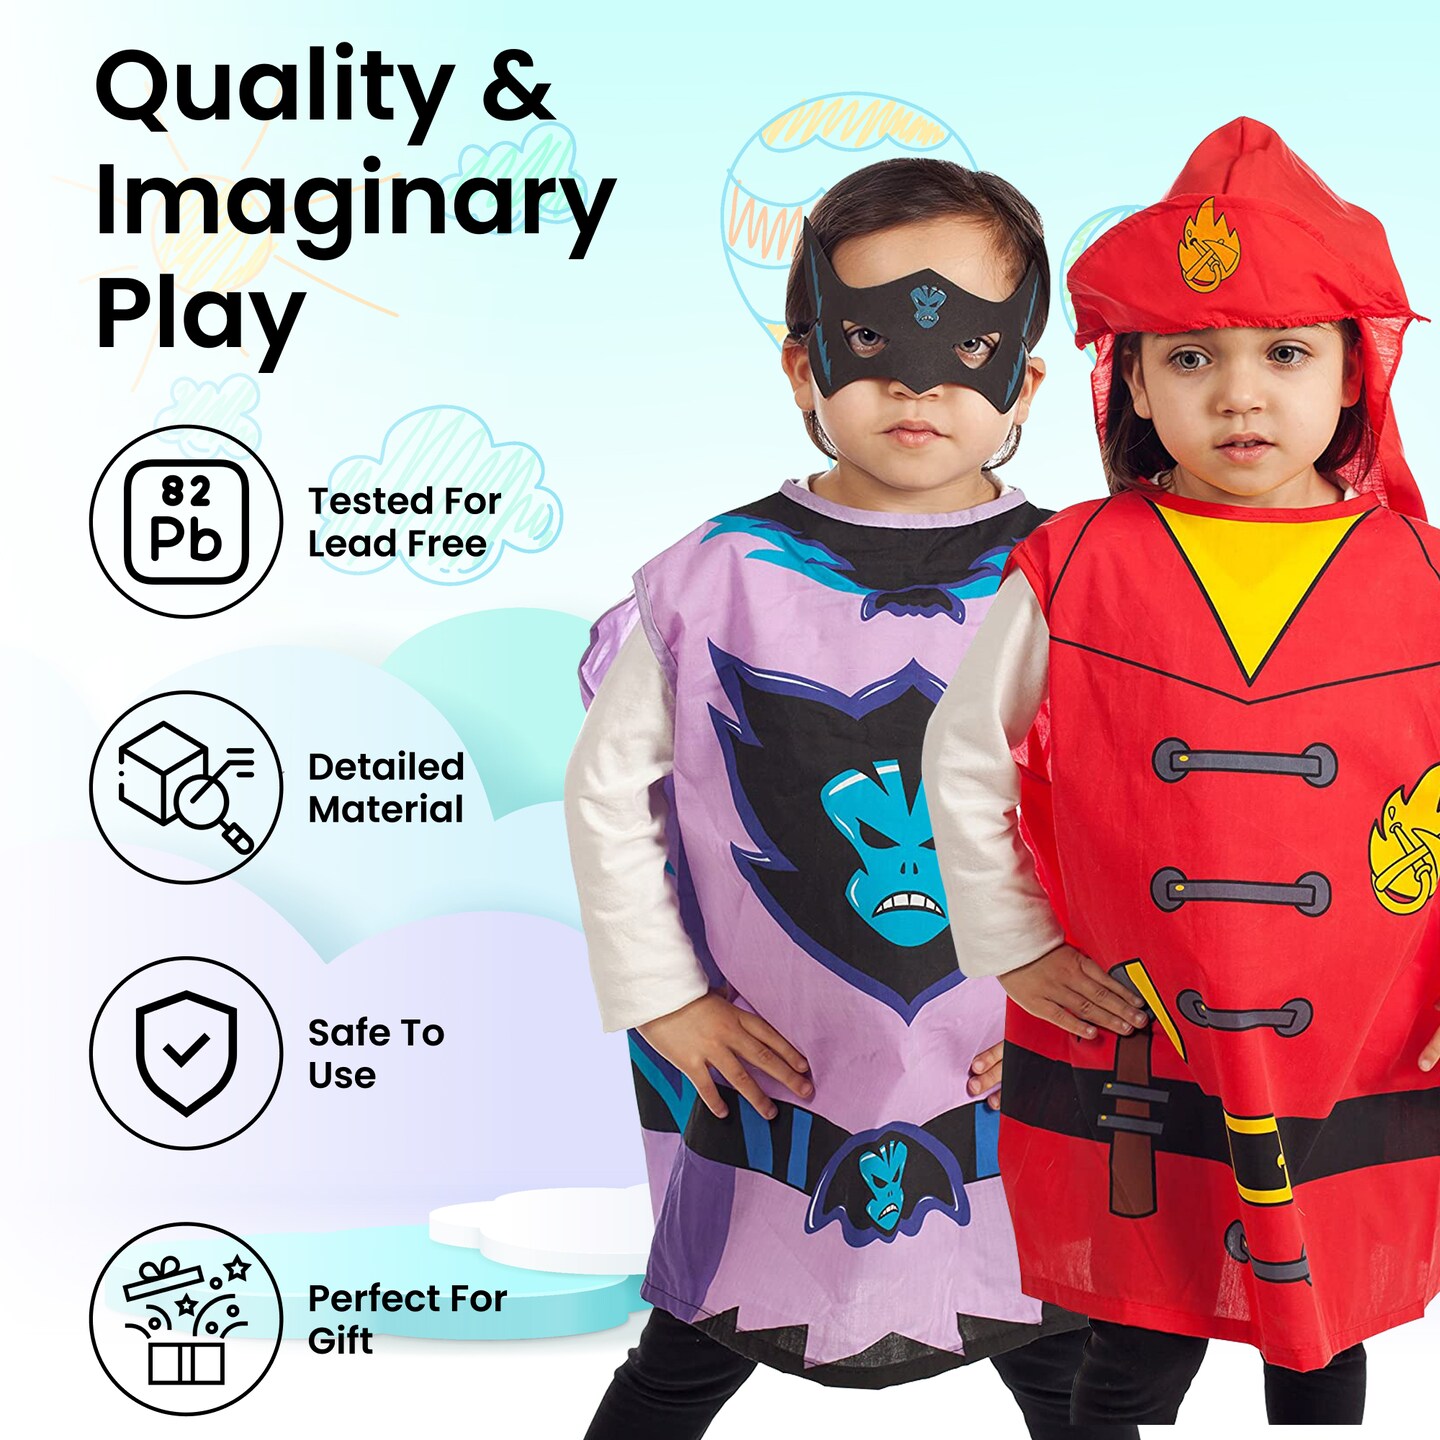 IQ Toys Dress Up Costumes Trunk Set - Firefighter, Chef, Doctor, Clown, Witch, Gotham - Kids Costume Dress Up - 6 Pack